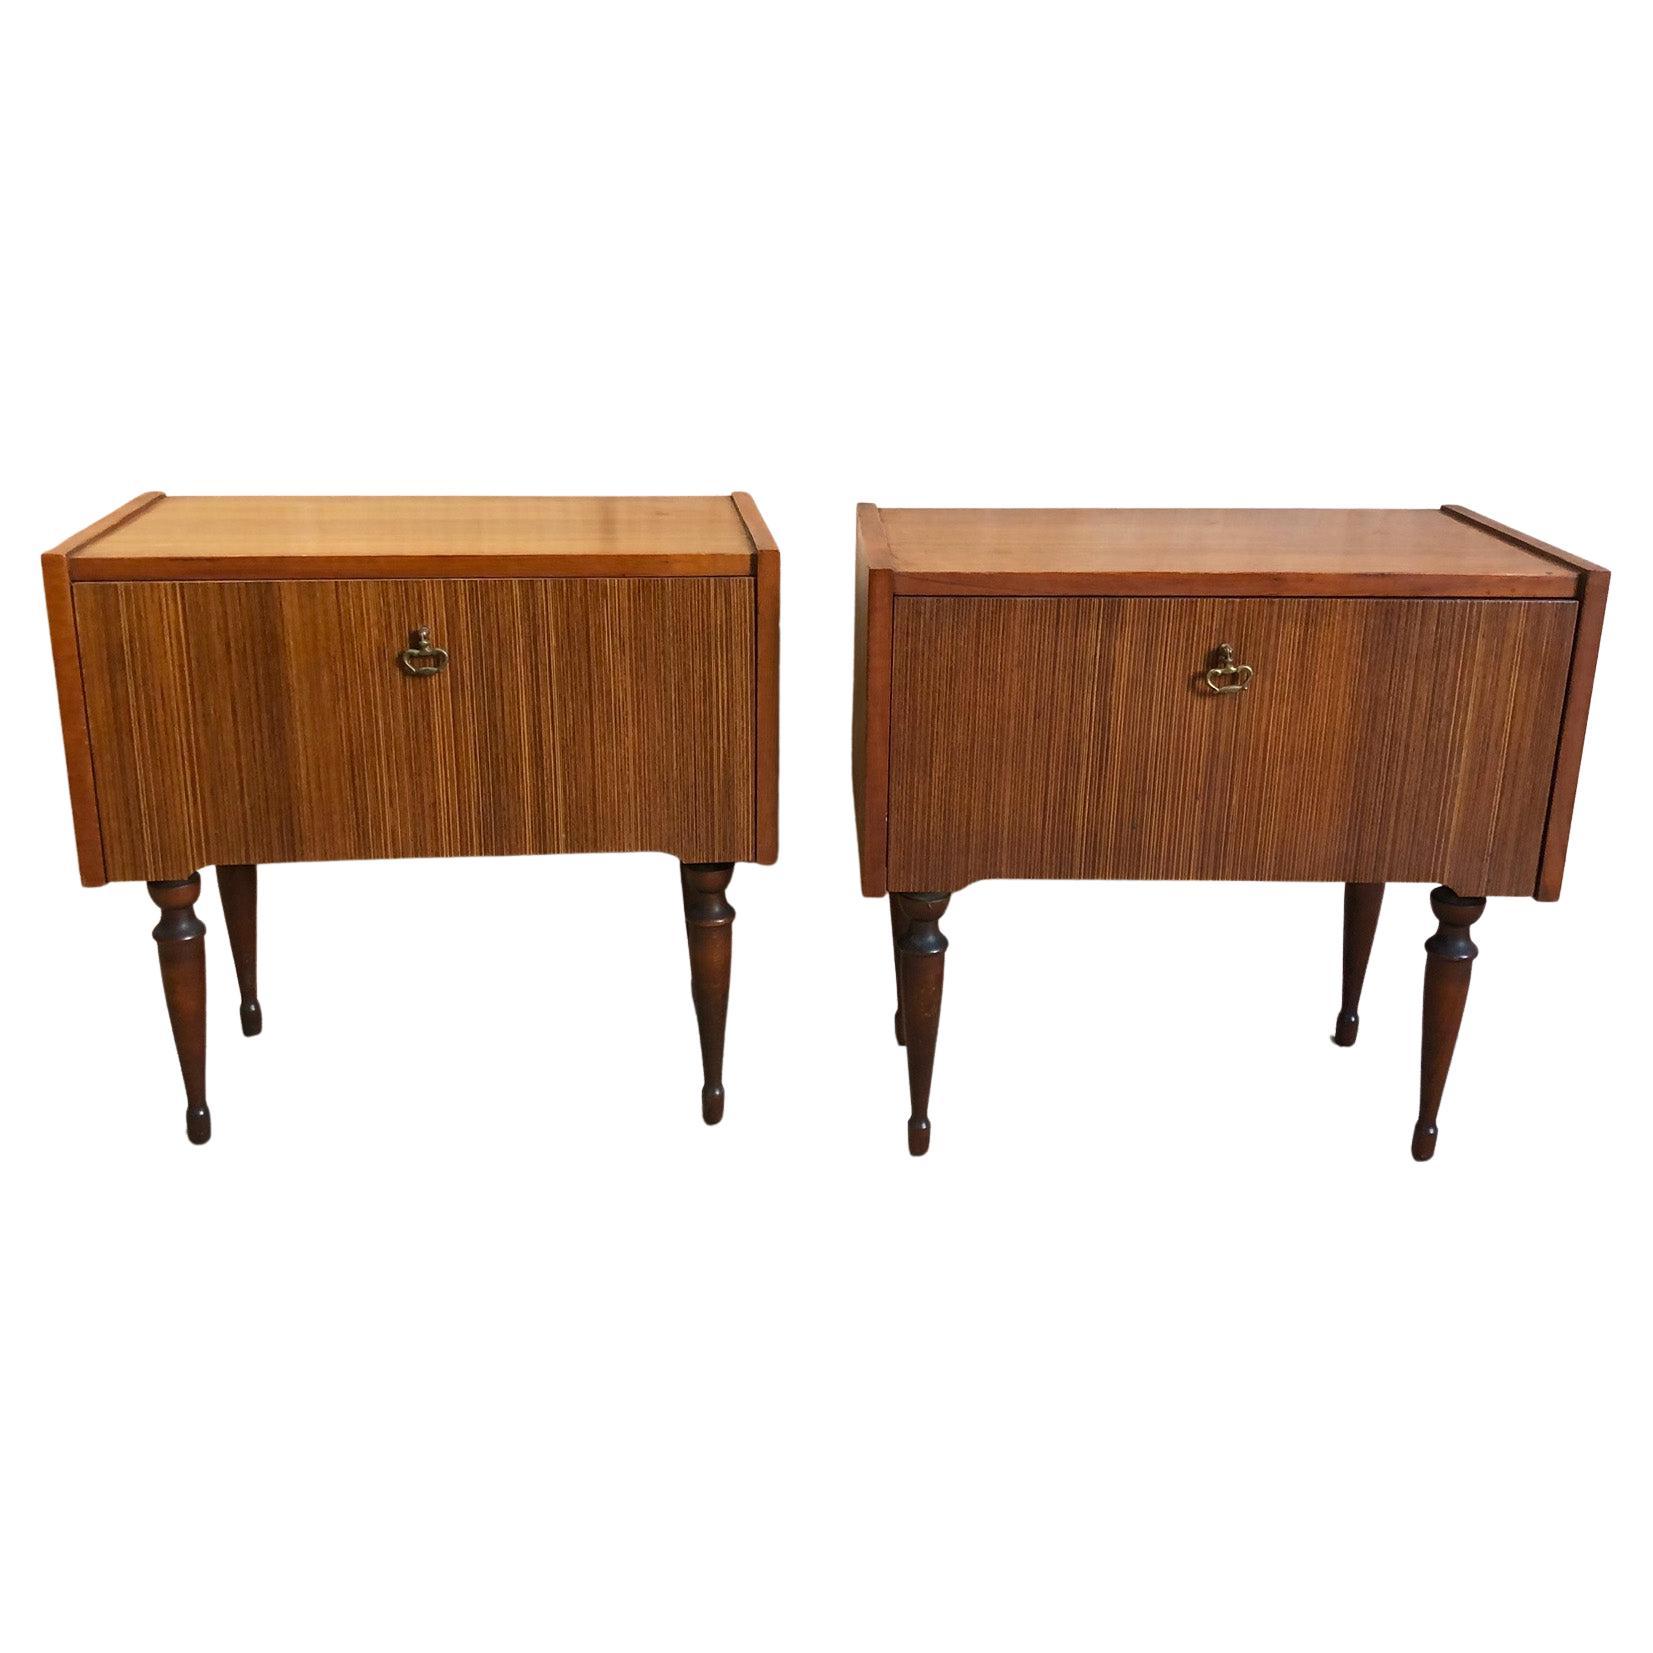 Pair of Bedside Tables from 1970, Italian, Teak Honey Color